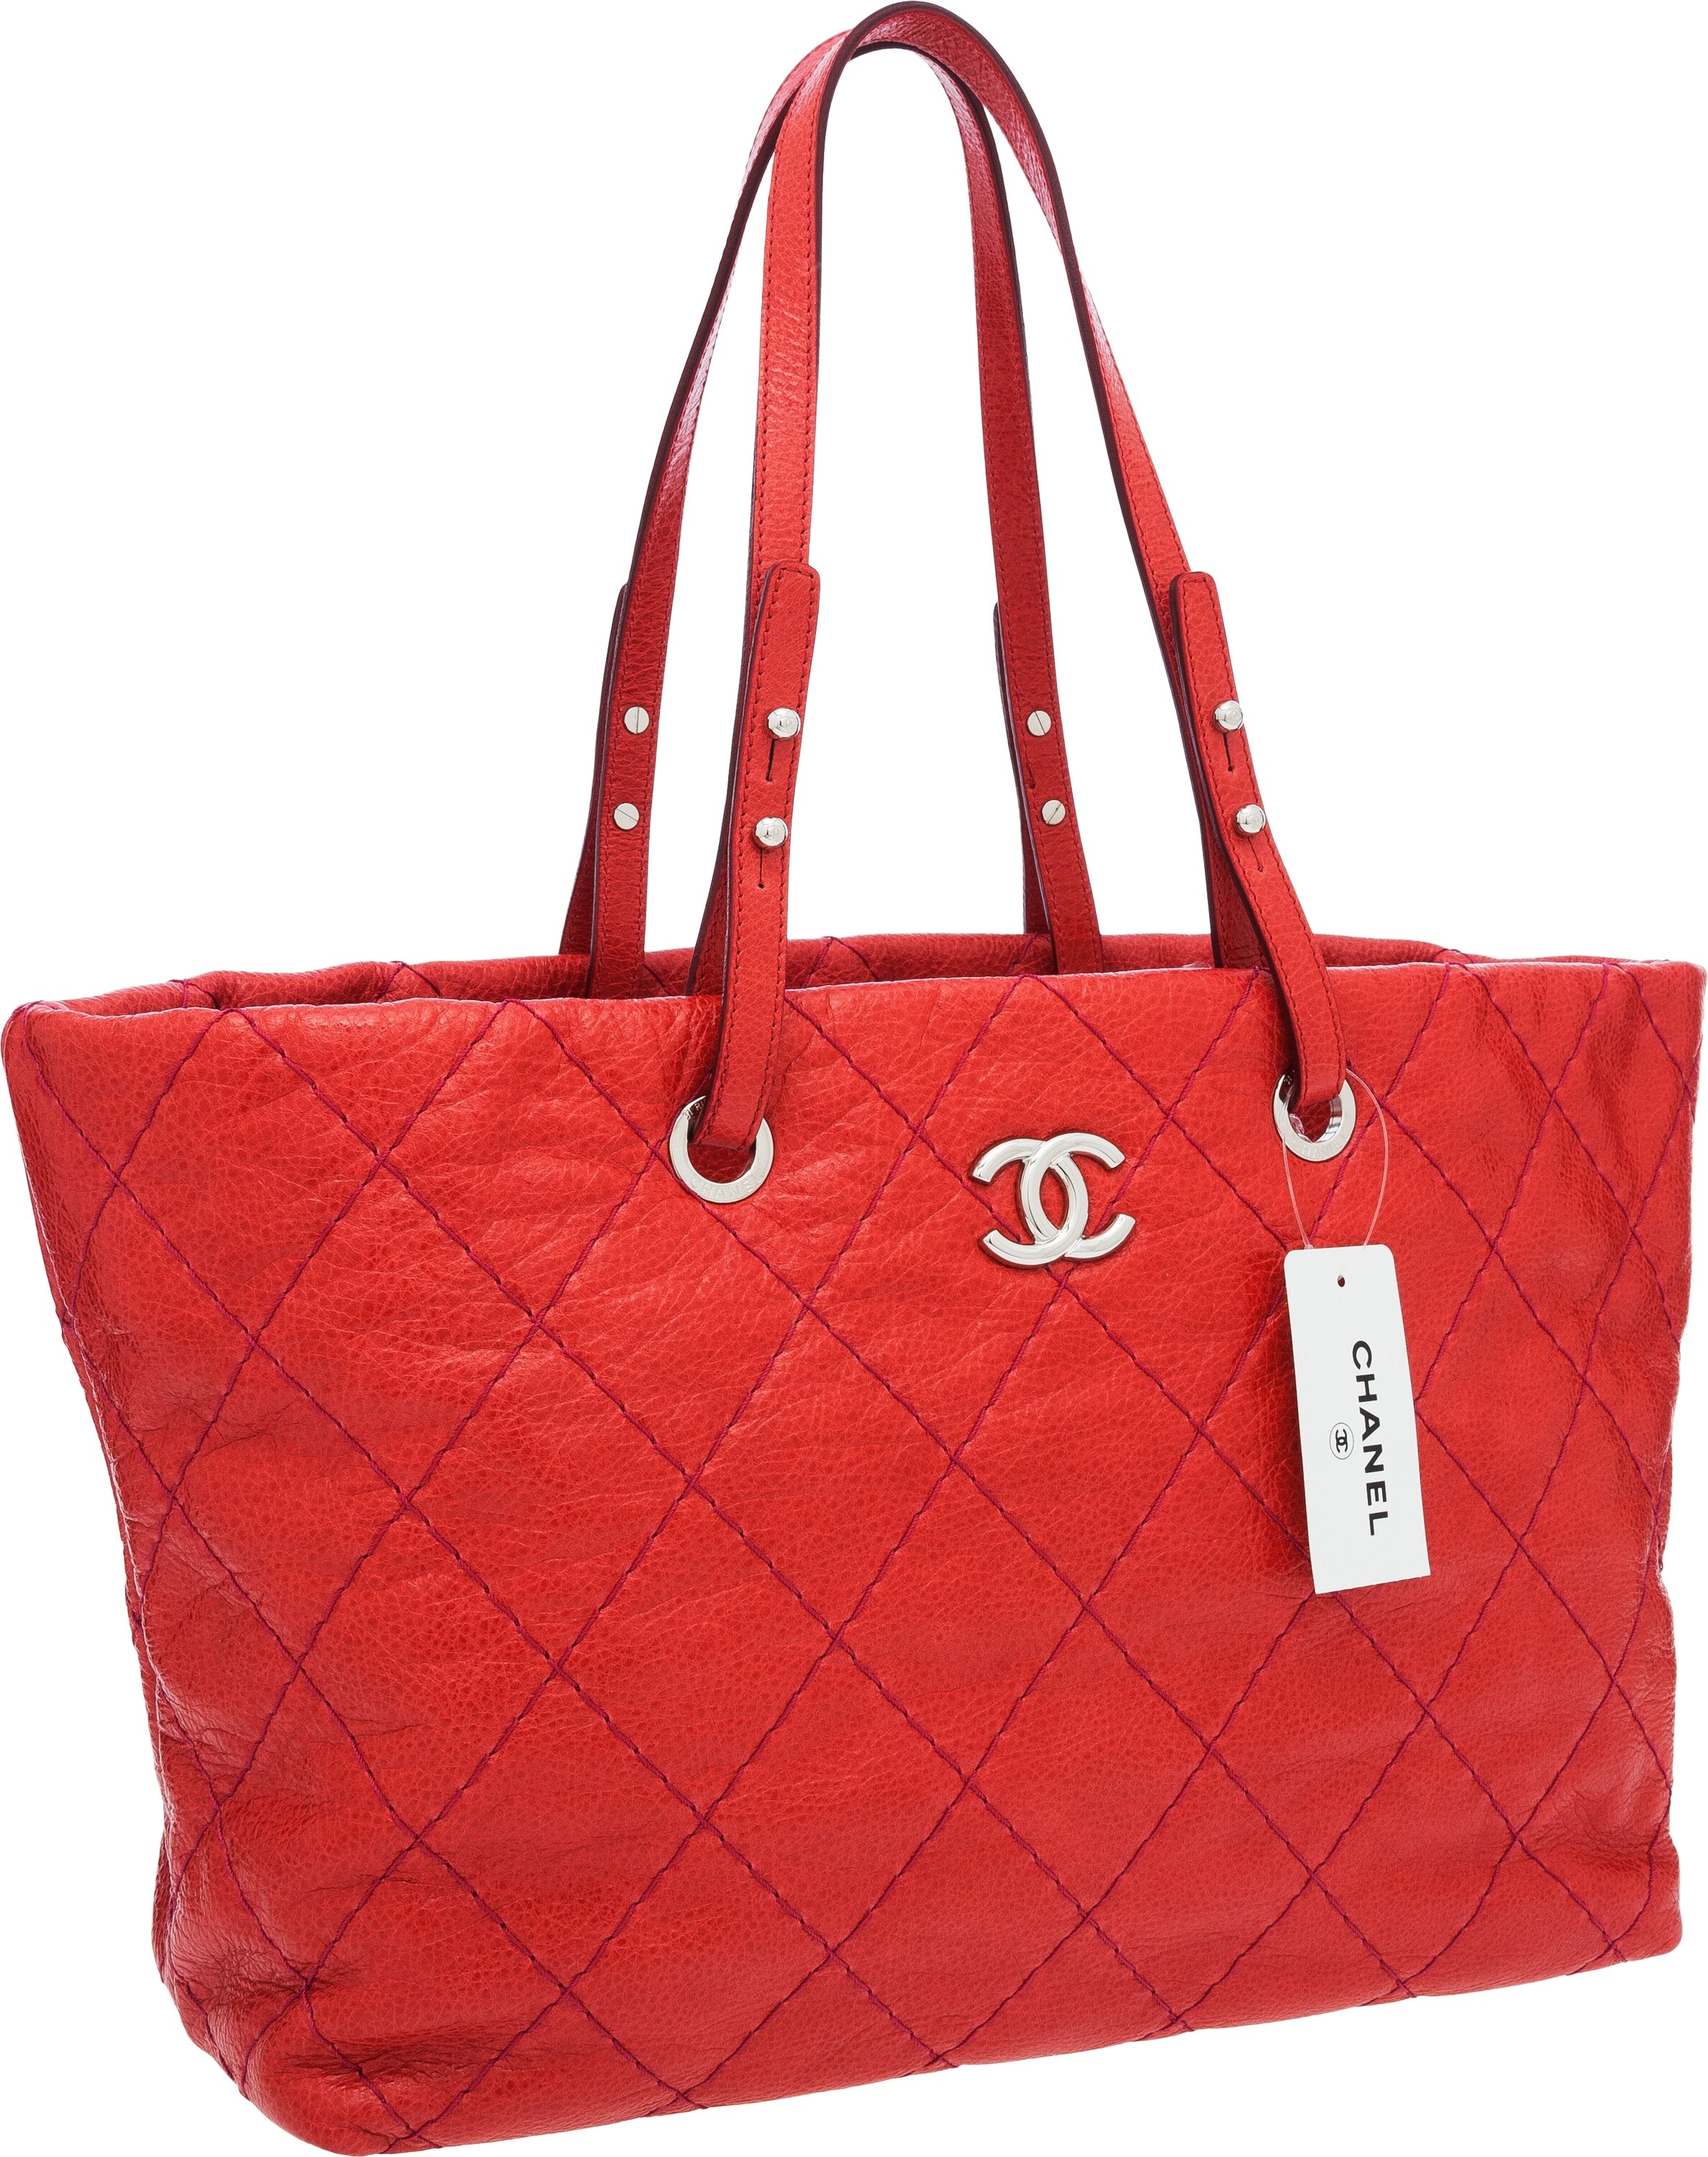 Chanel Red Quilted Caviar Leather Tote Bag with Silver Hardware., Lot  #56211